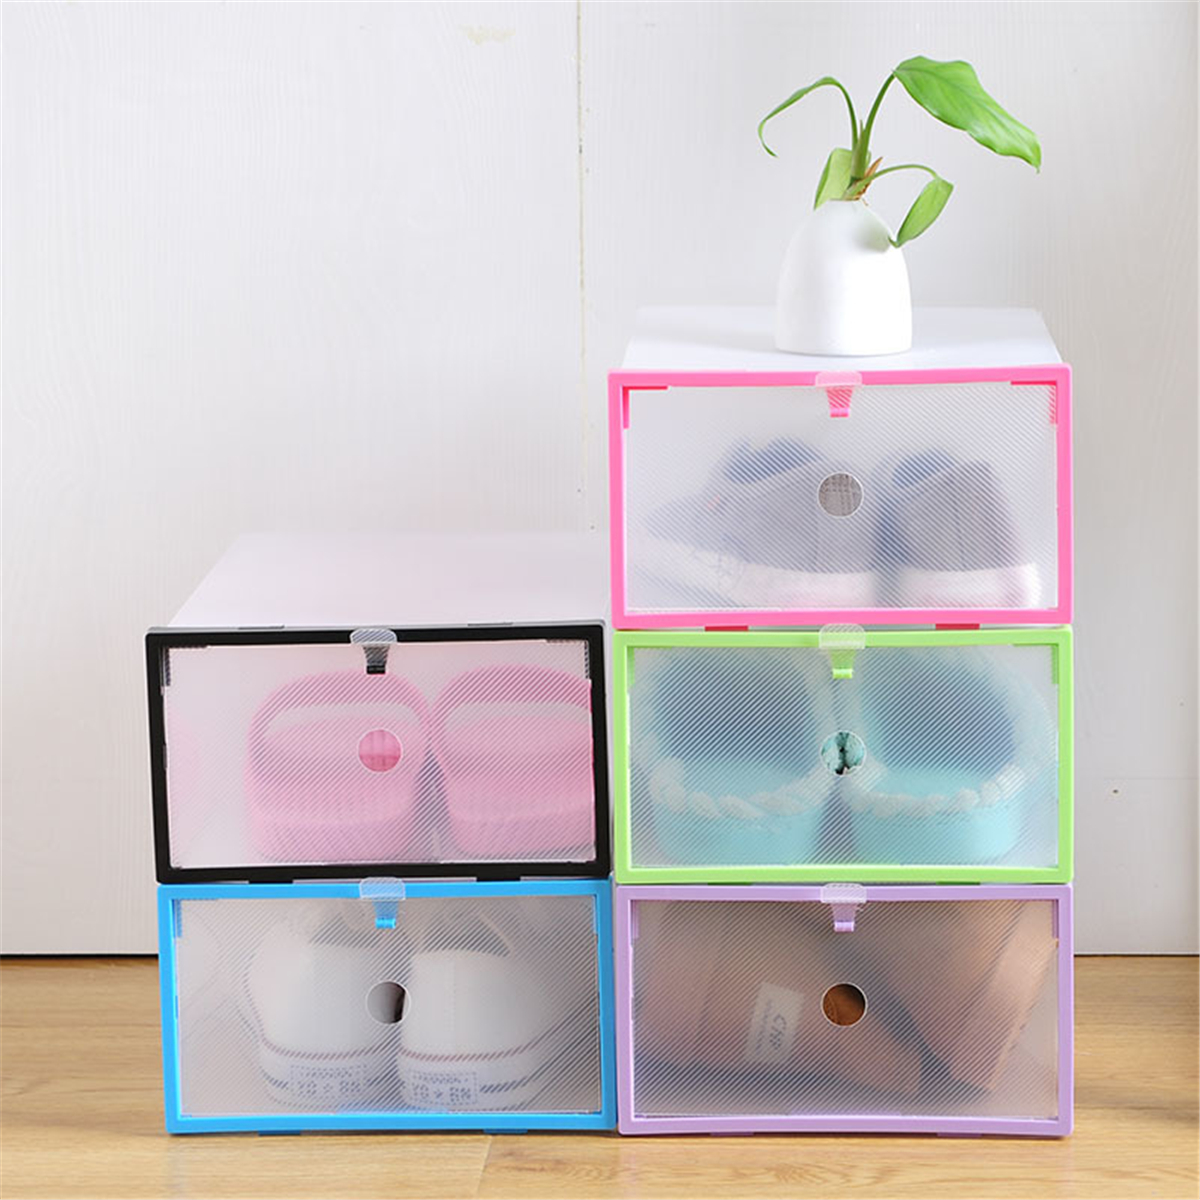 Foldable-Clear-Plastic-Shoe-Boxes-Storage-Organizer-Stackable-Tidy-Display-Box-Baskets-1465766-4